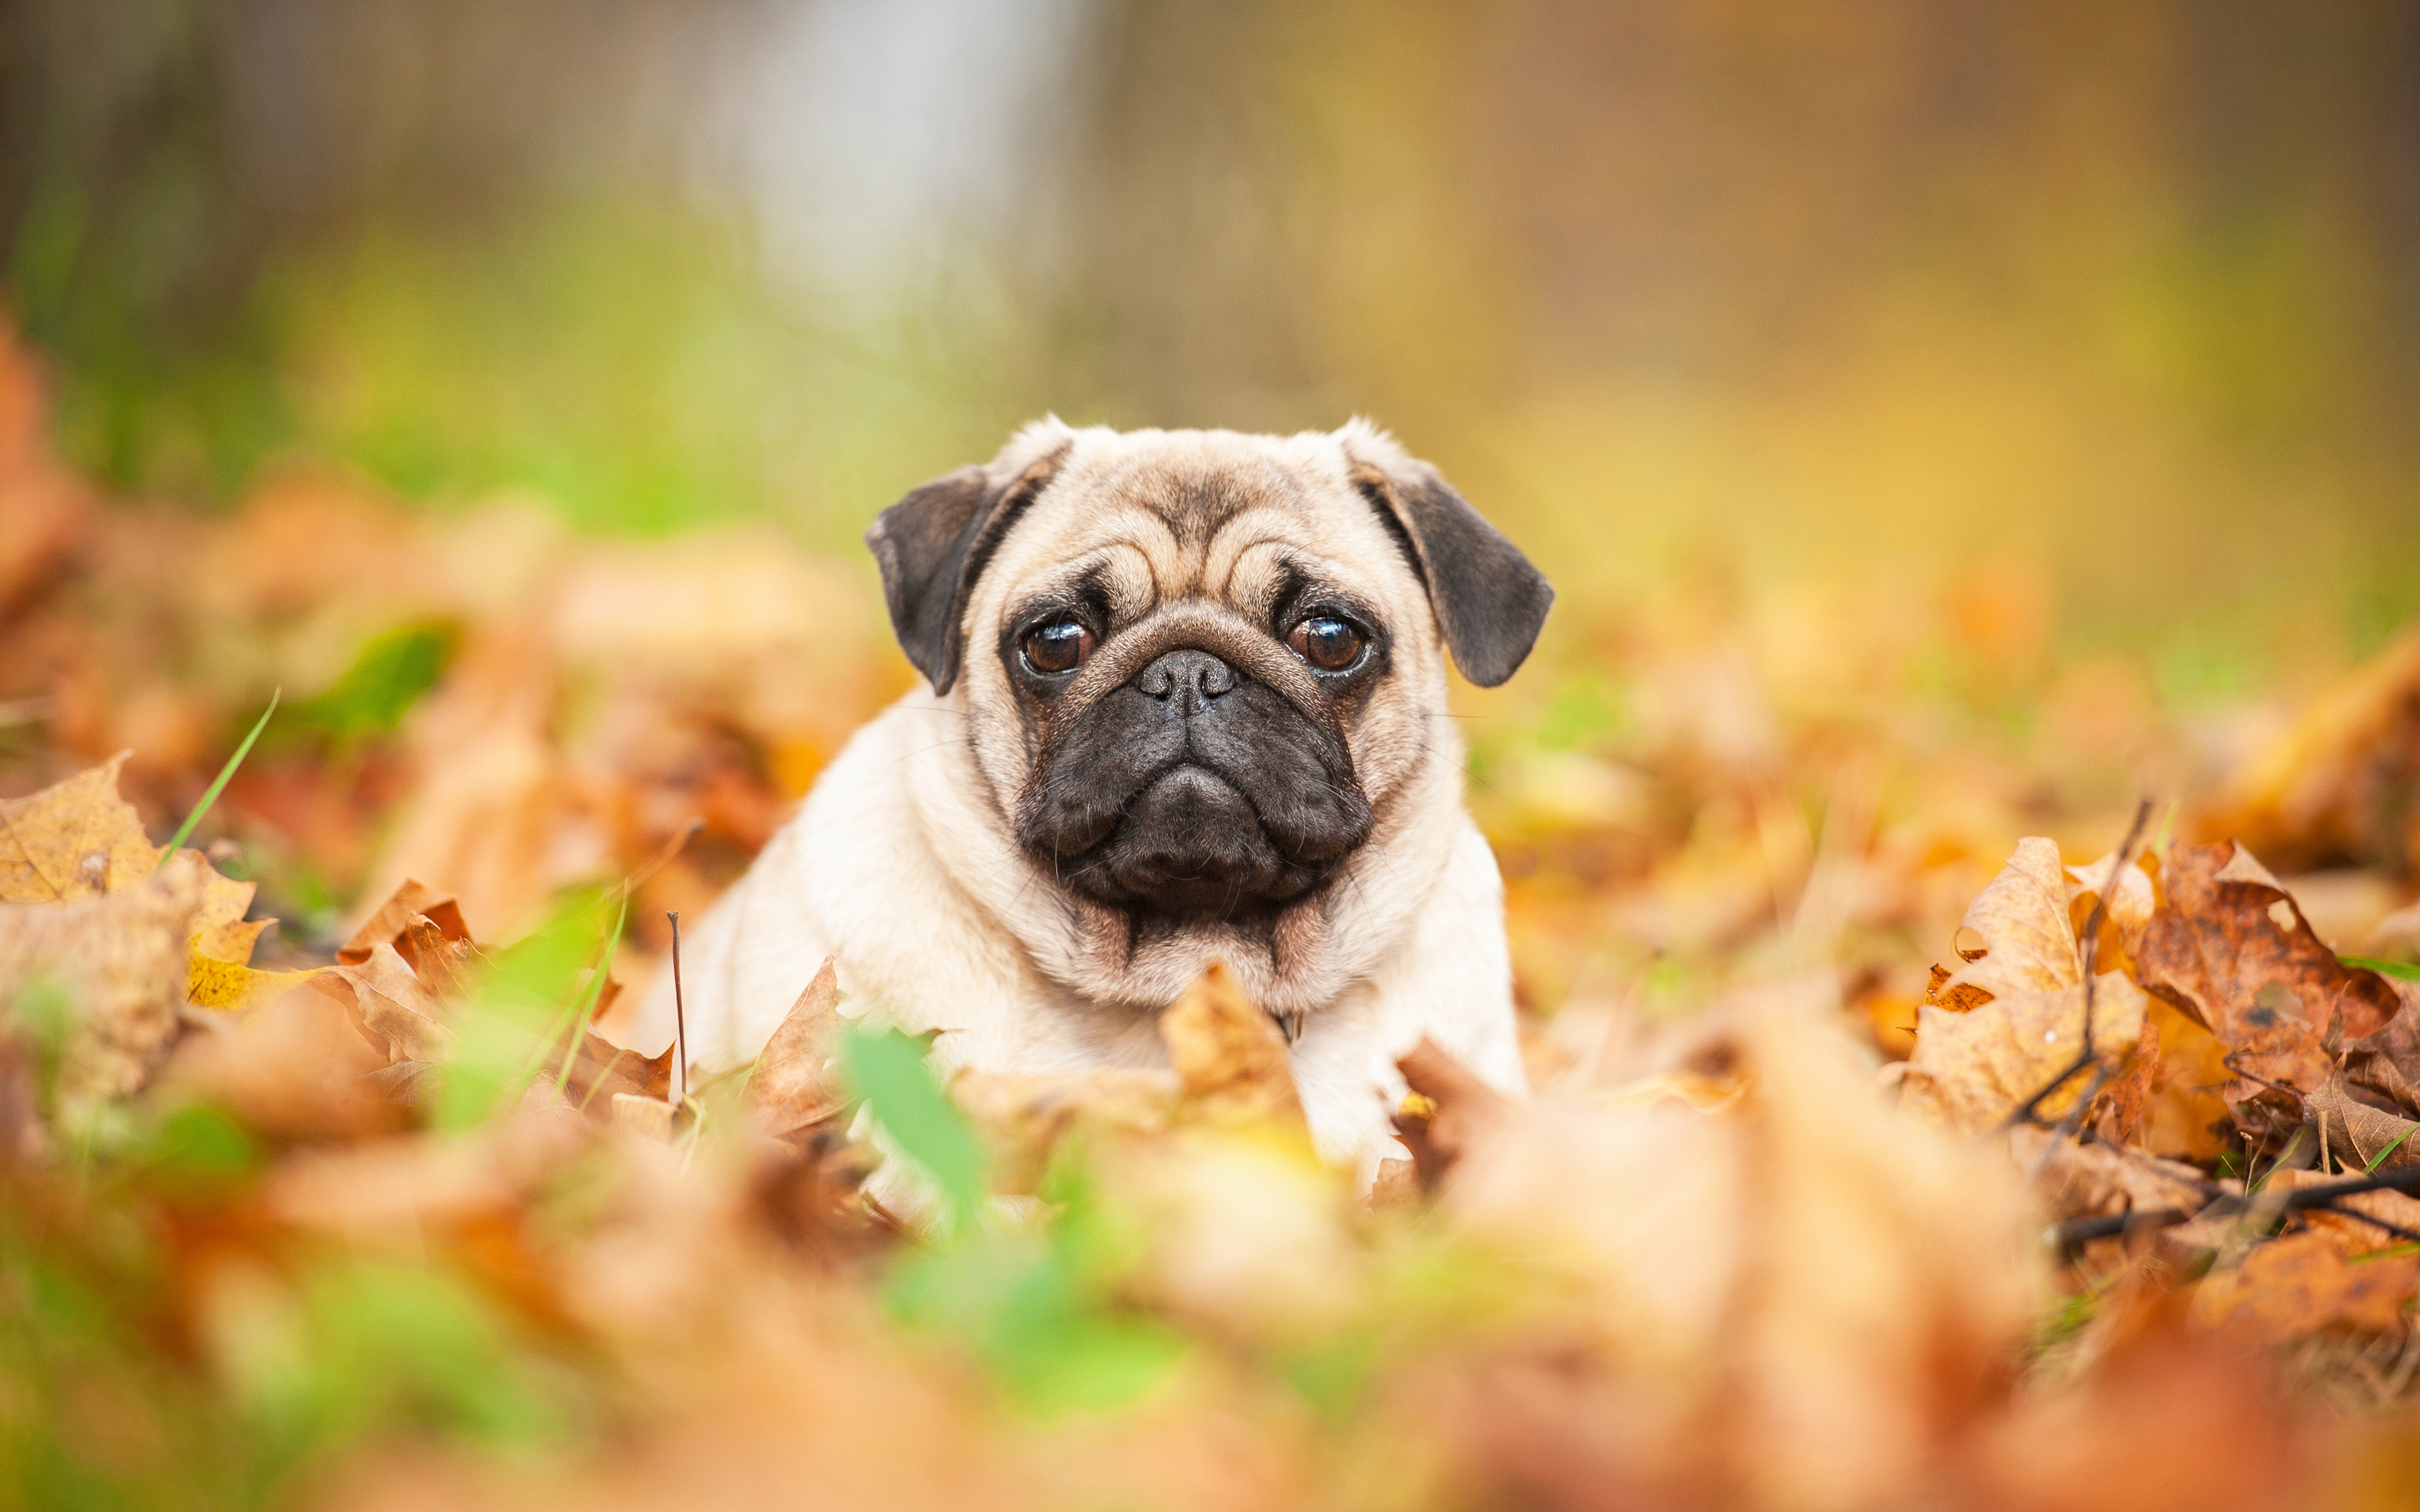 Download wallpaper Pug, small puppy, cute animals, small dog, autumn, 4k for desktop with resolution 3840x2400. High Quality HD picture wallpaper